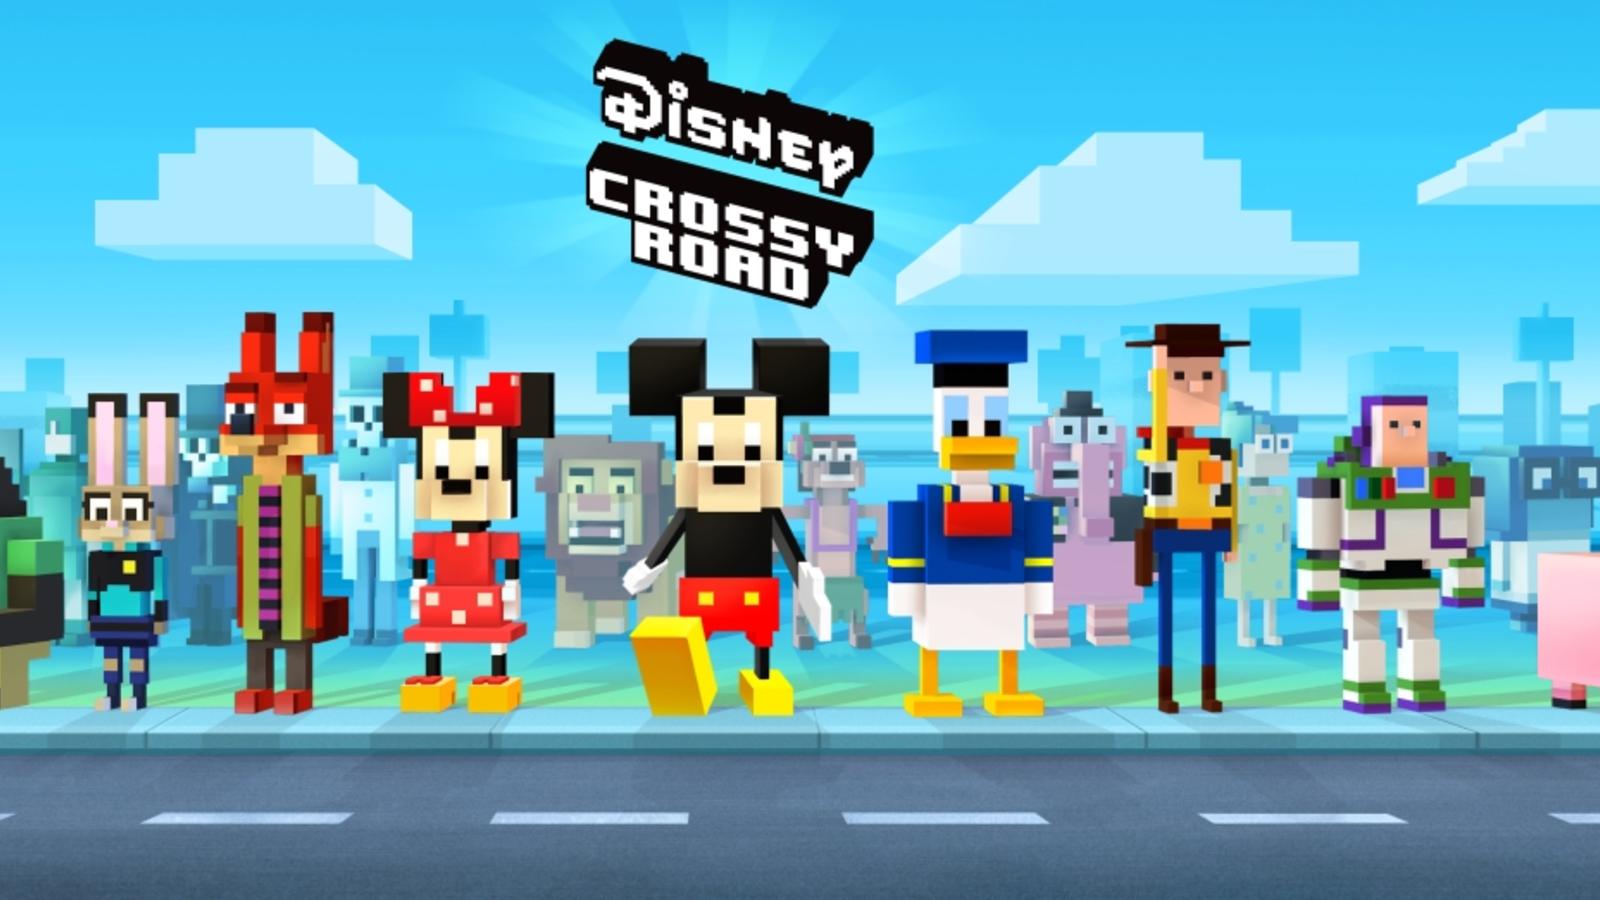 Disney Crossy Road' Secret Characters Update: Unlock New 'Pirates Of Caribbean' Mystery Characters With This Cheat List